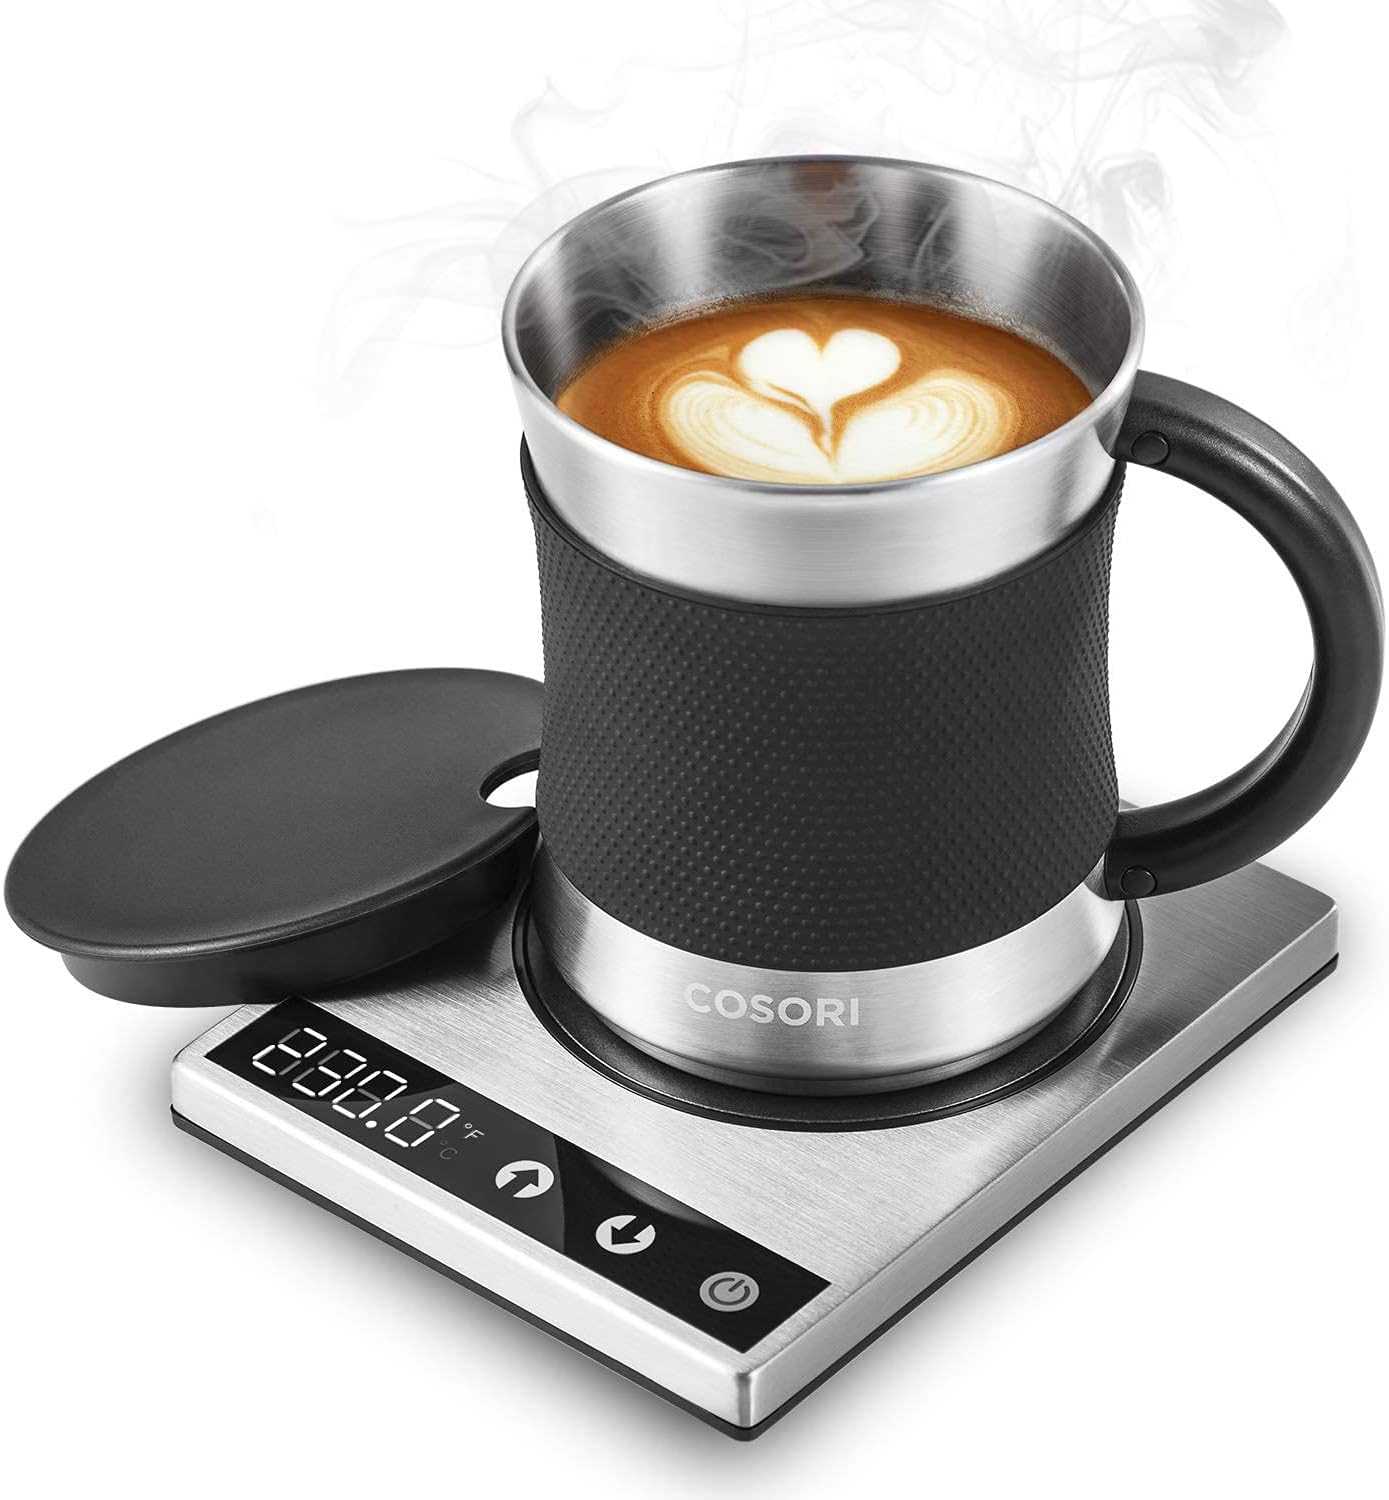 COSORI Coffee Mug Warmer  Mug Set for Desk, Cup Heater, Office  Christmas Gifts, 1°F Precise Temperature Control, Touch Tech  LCD Digital Display (77-194℉), 304 Stainless Steel, Silver/Black